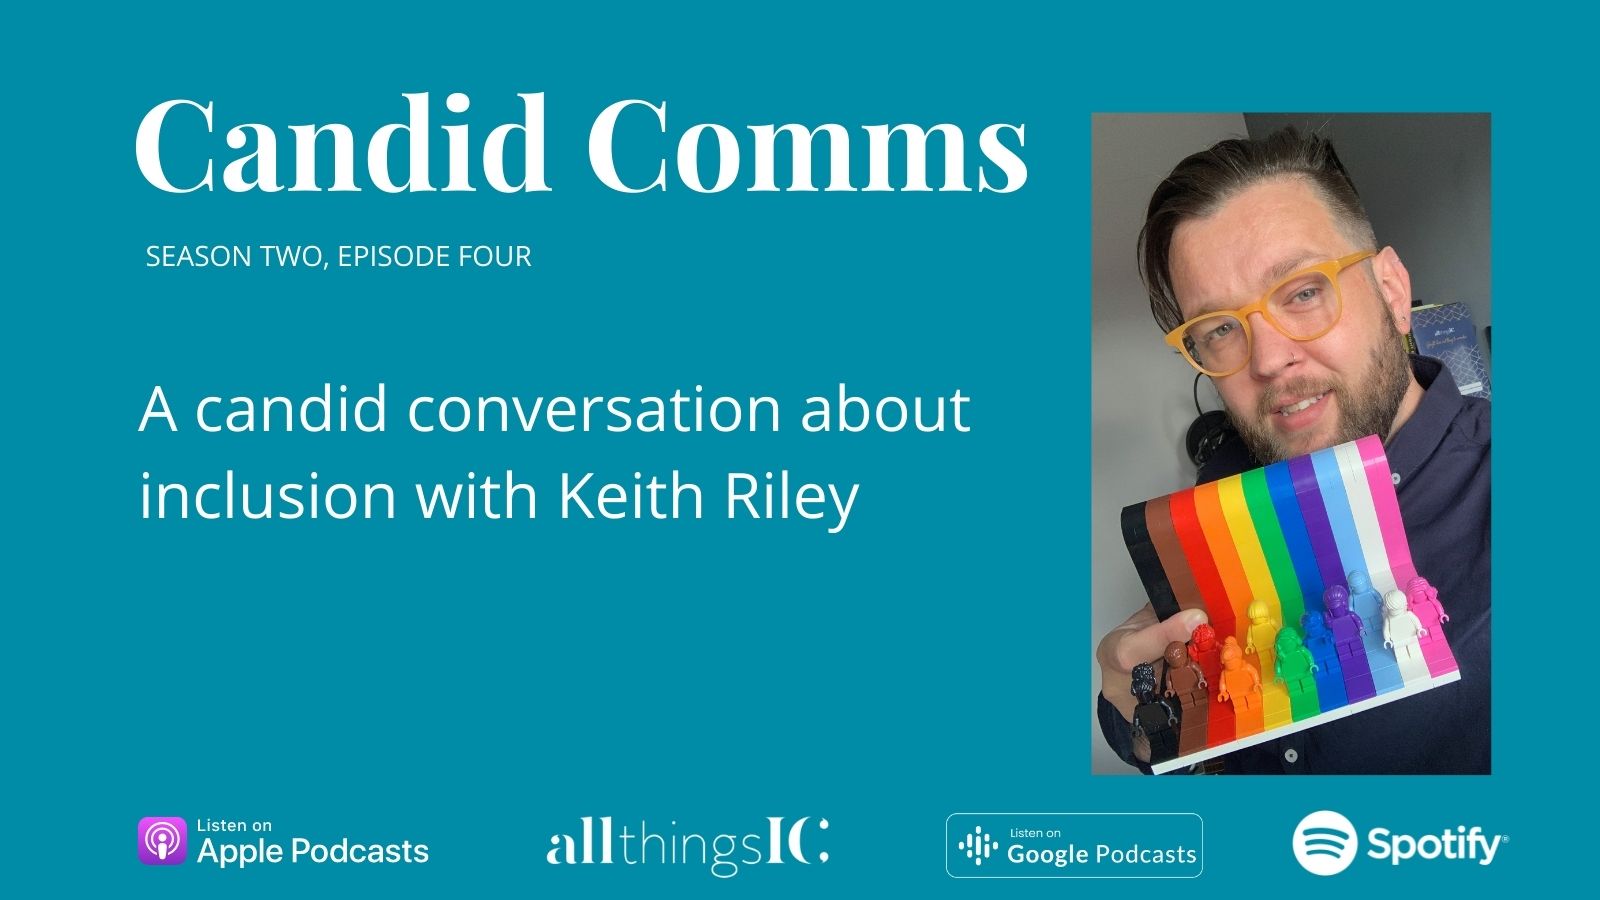 Candid Comms: A candid conversation about inclusion with Keith Riley